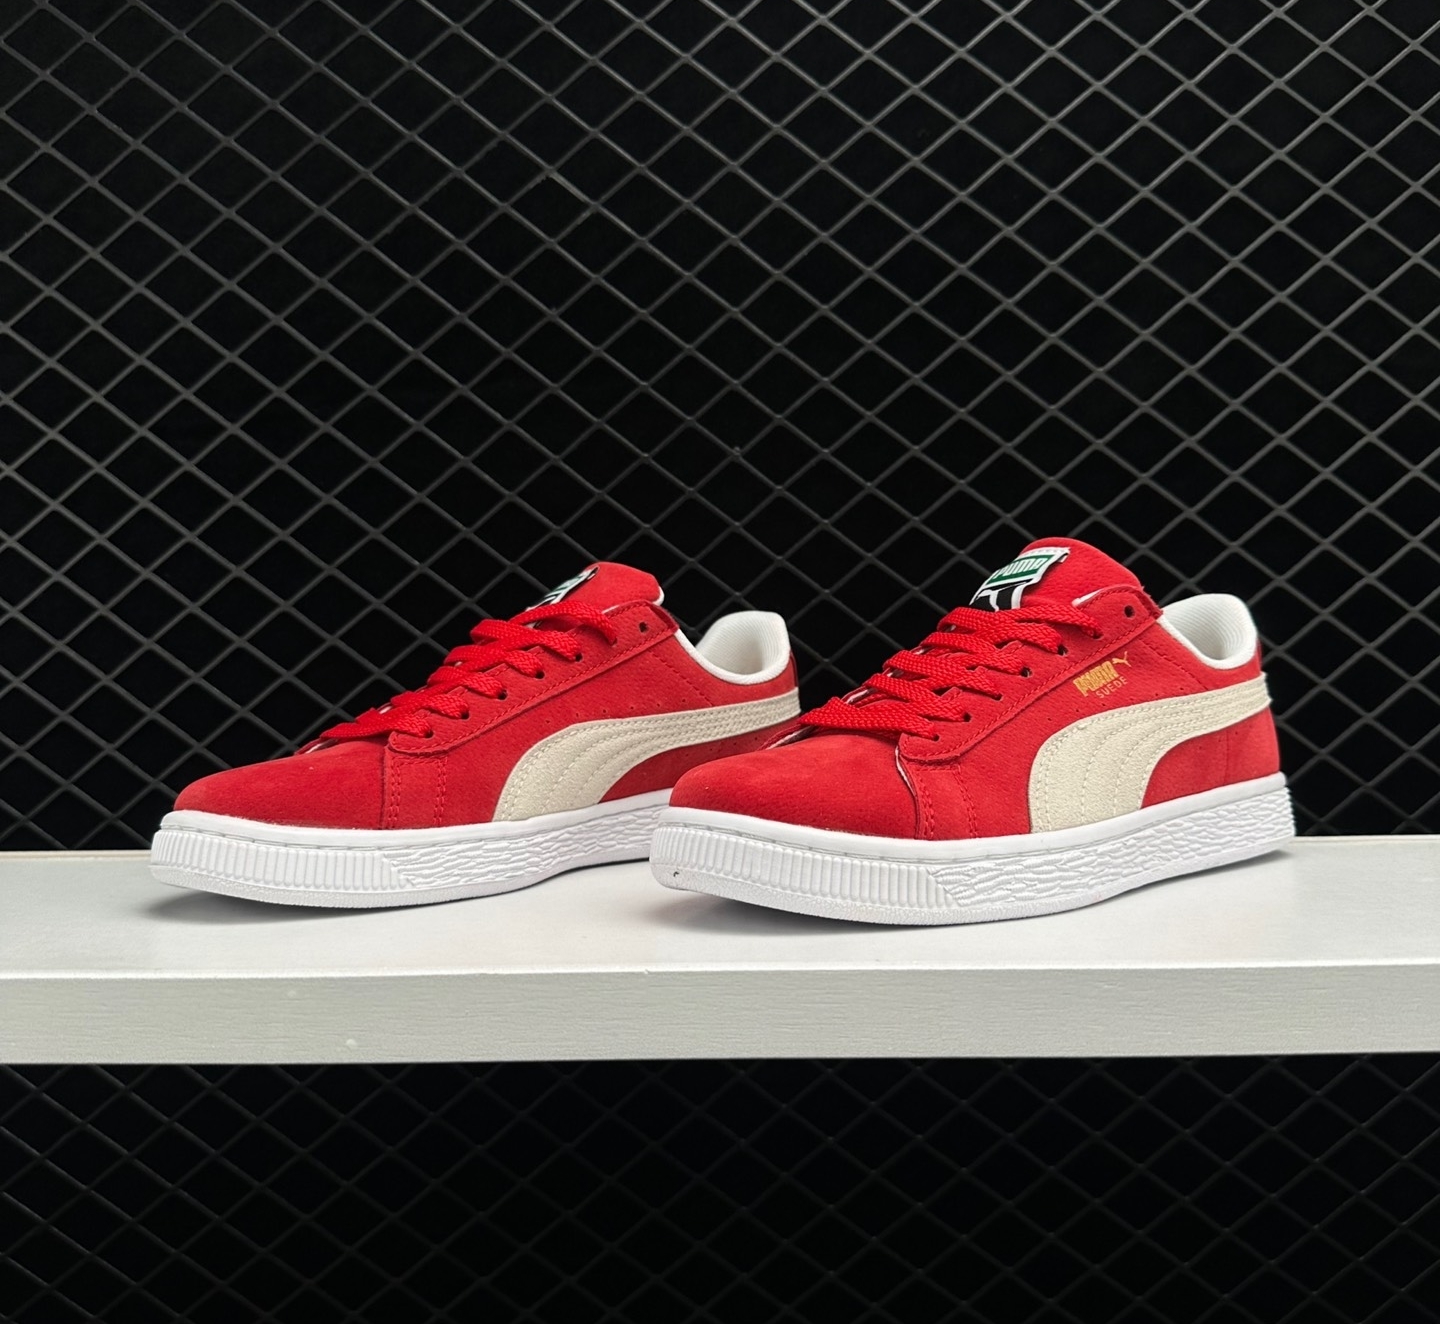 Puma Suede Classic XXI Red 374915 02 - Stylish & Iconic Men's Sneakers